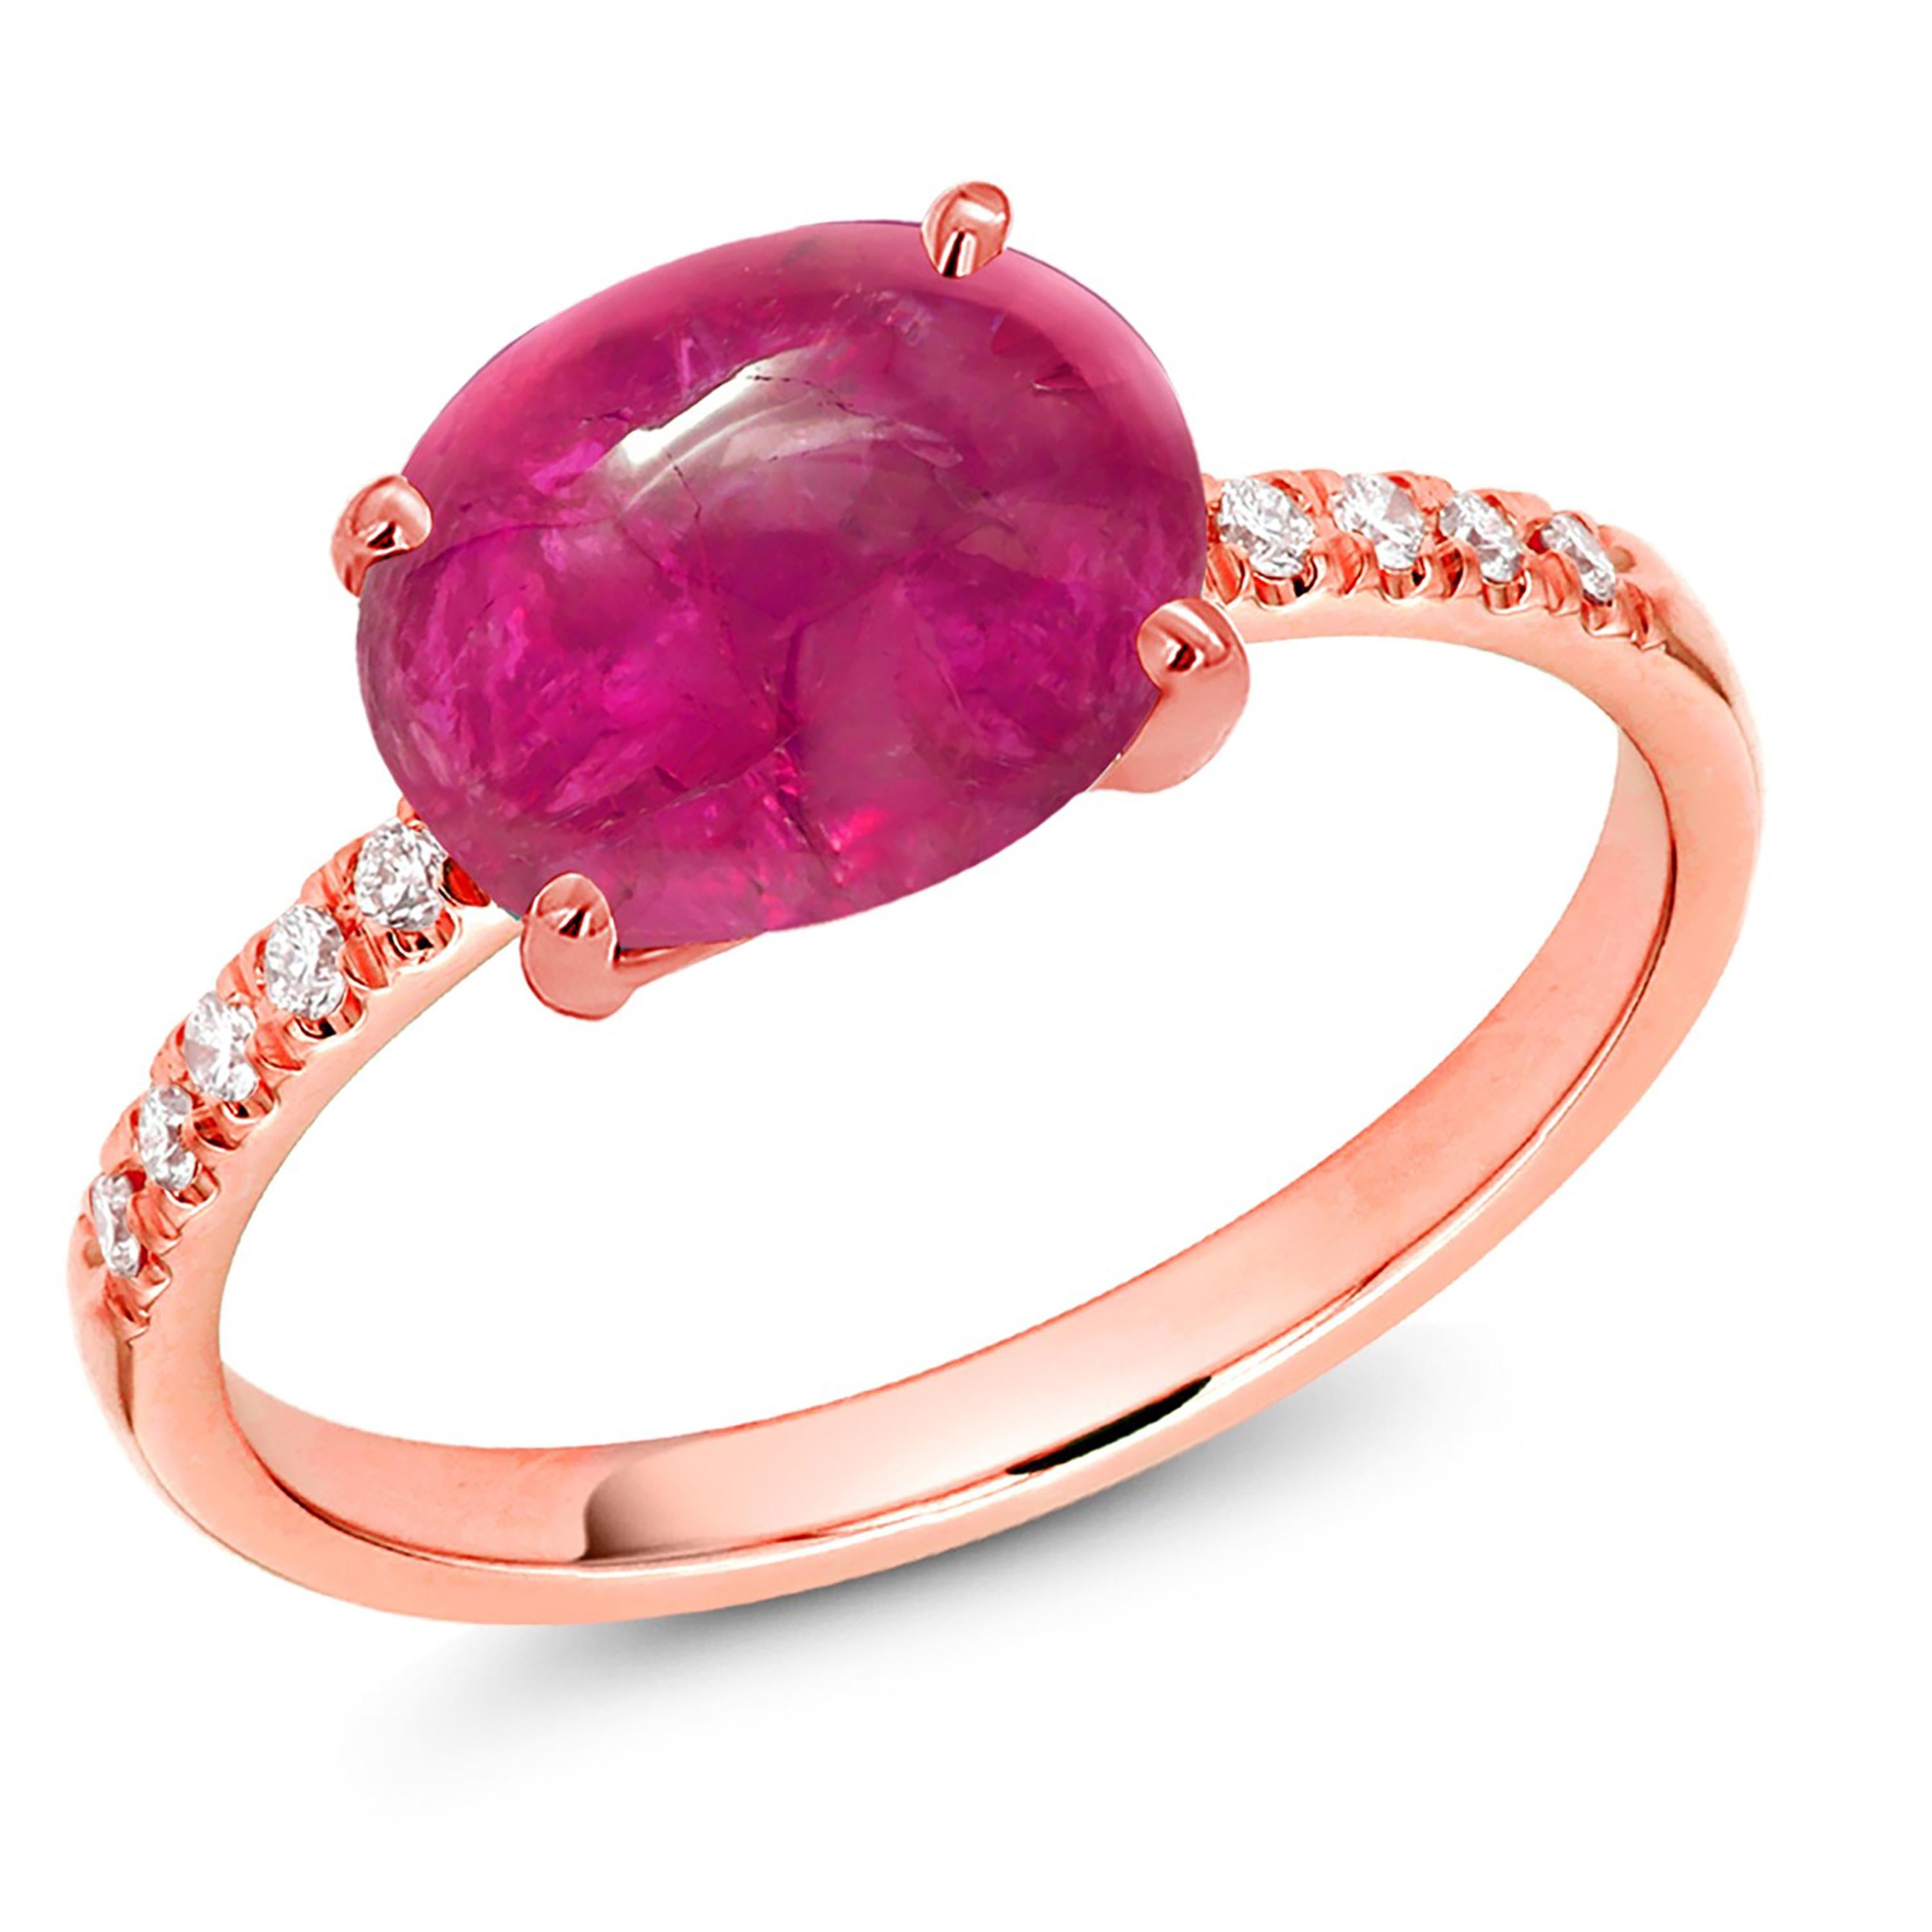 Cabochon Burma Ruby 2.80 Carat Diamond 0.25 Carat Rose Gold Cocktail Ring In New Condition For Sale In New York, NY